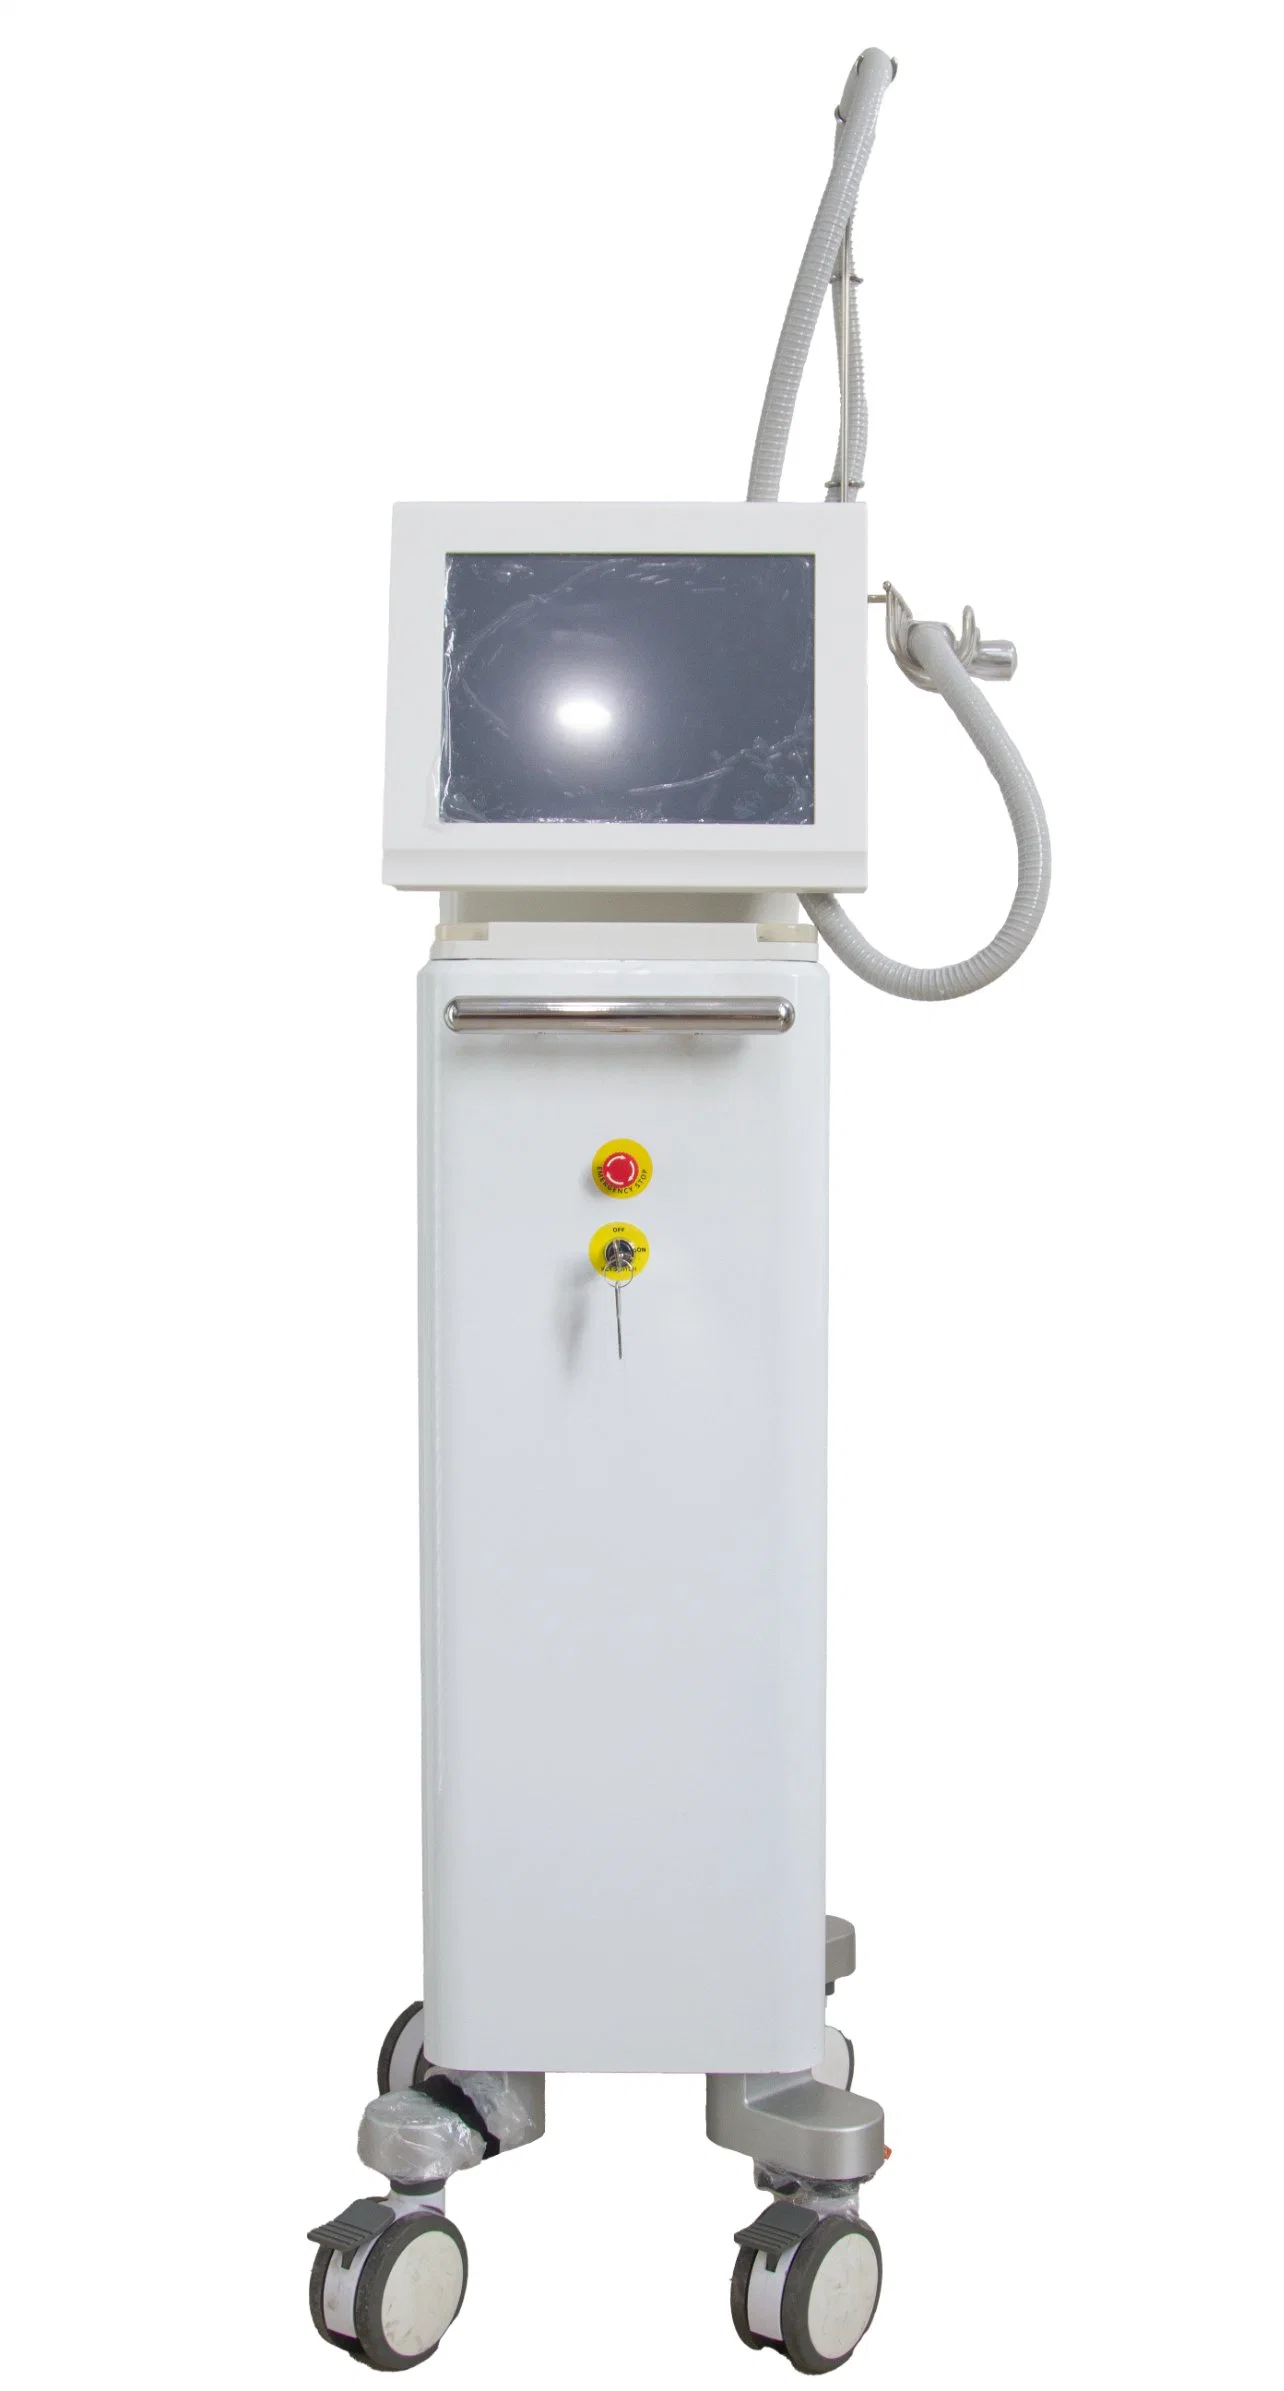 1927nm Fractional Thulium Laser Skin Rejuvenation Body Beauty Equipment Assists with Hair Regrowth